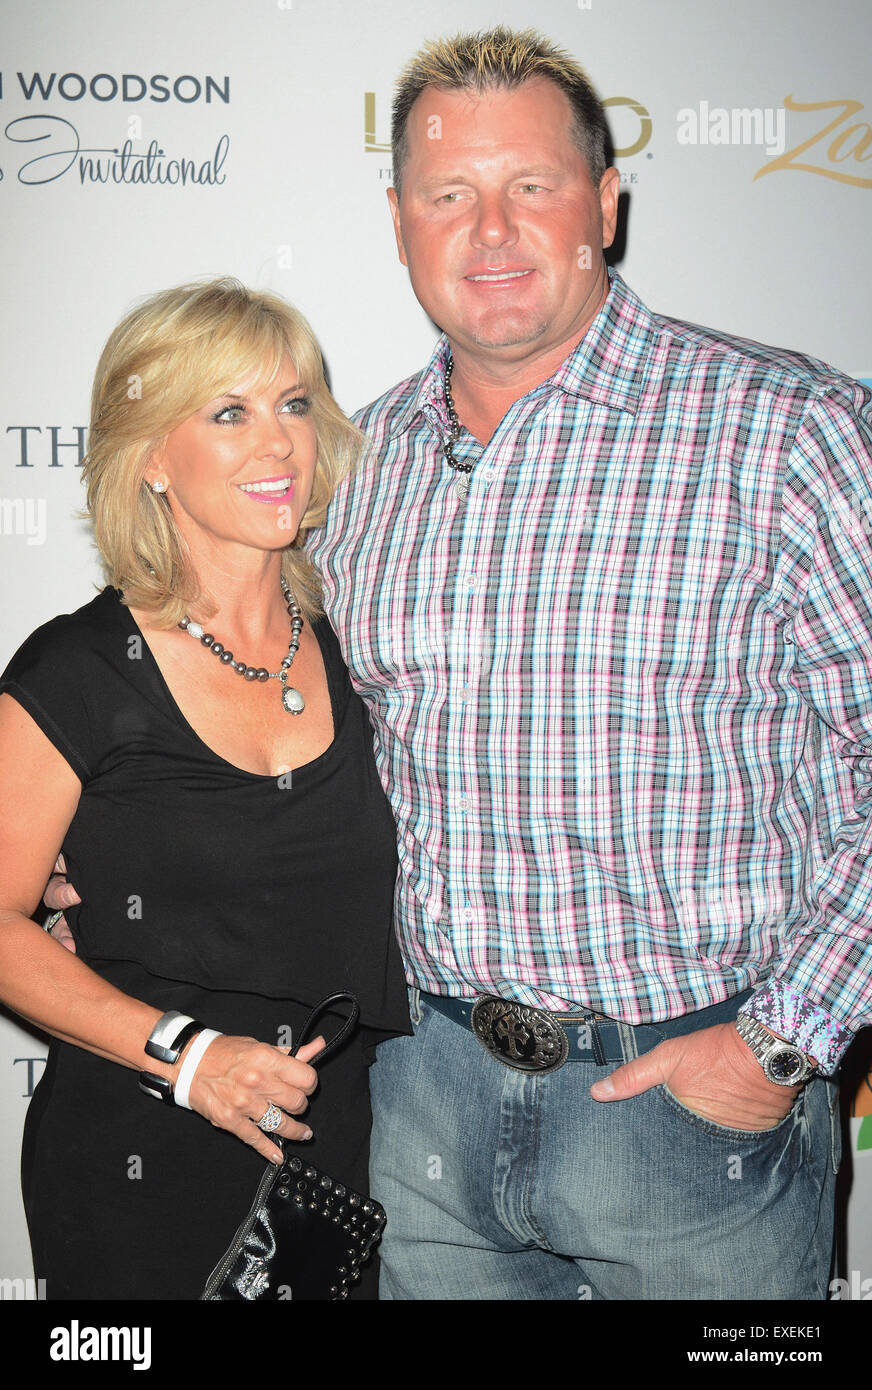 Las Vegas, Nevada, USA. 12th July, 2015. Roger Clemens and wife